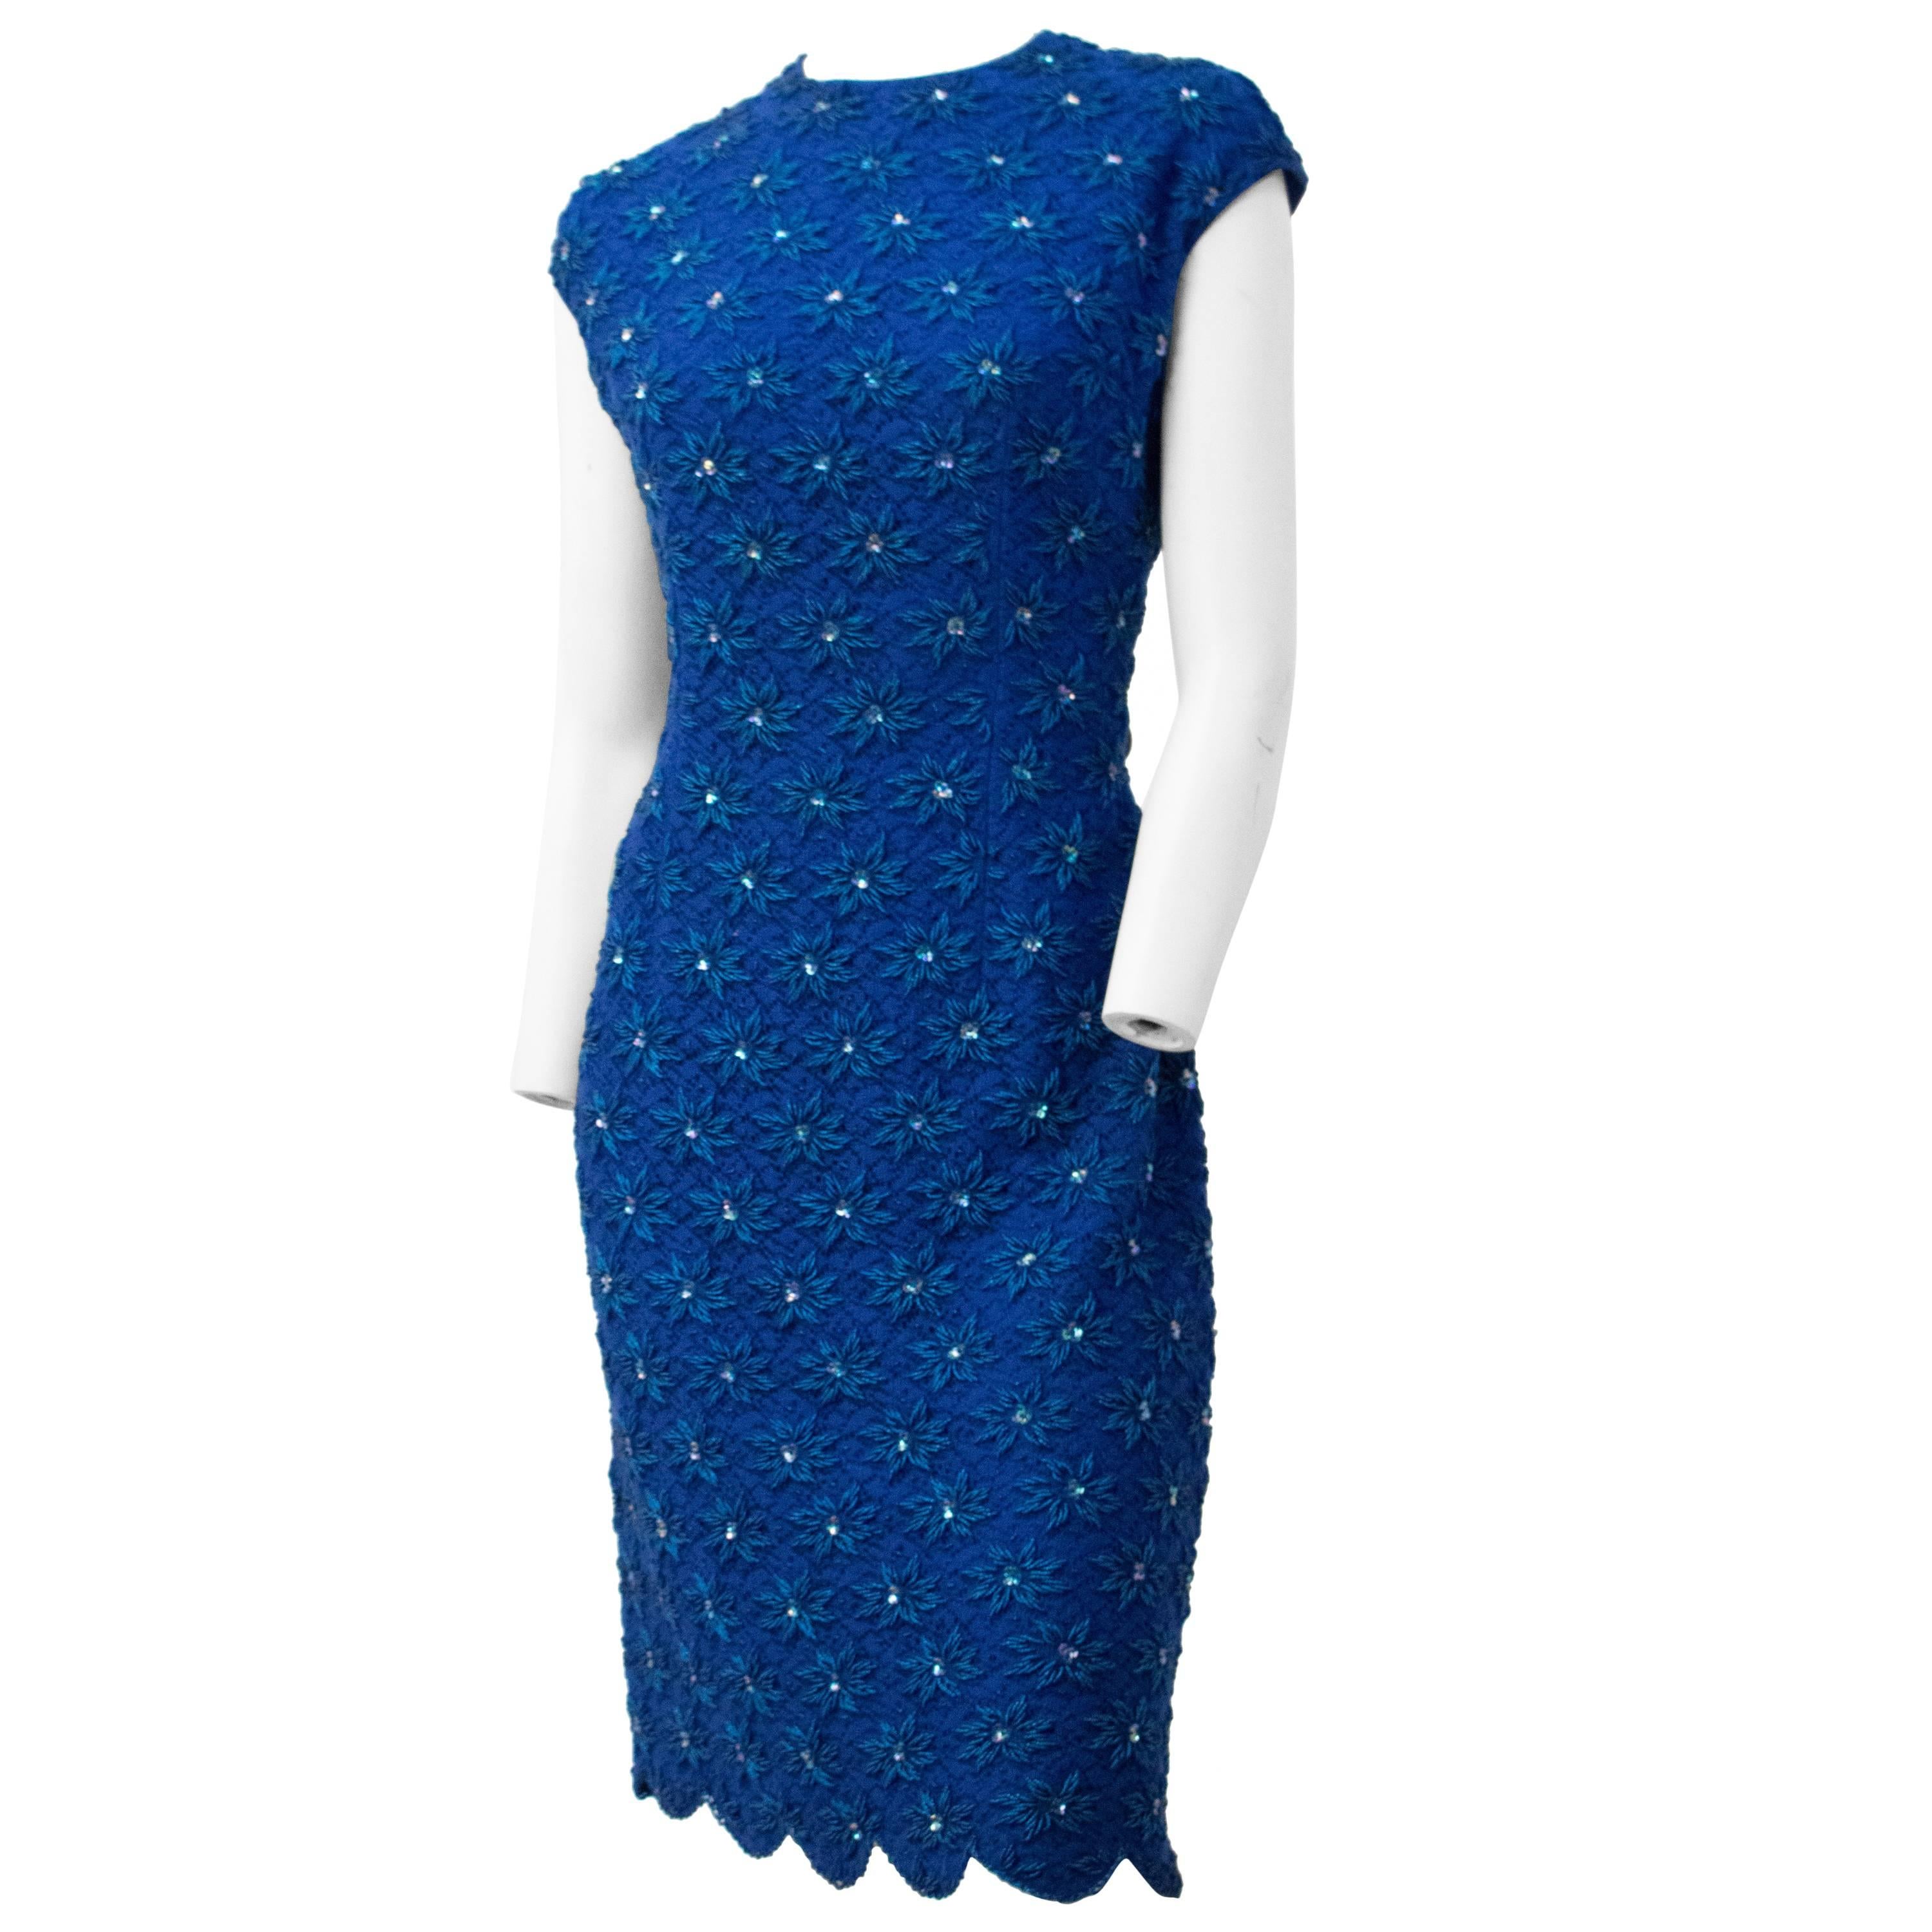 1960s Royal Blue Lace and Beaded Sheath Dress with Scallop Hem  For Sale